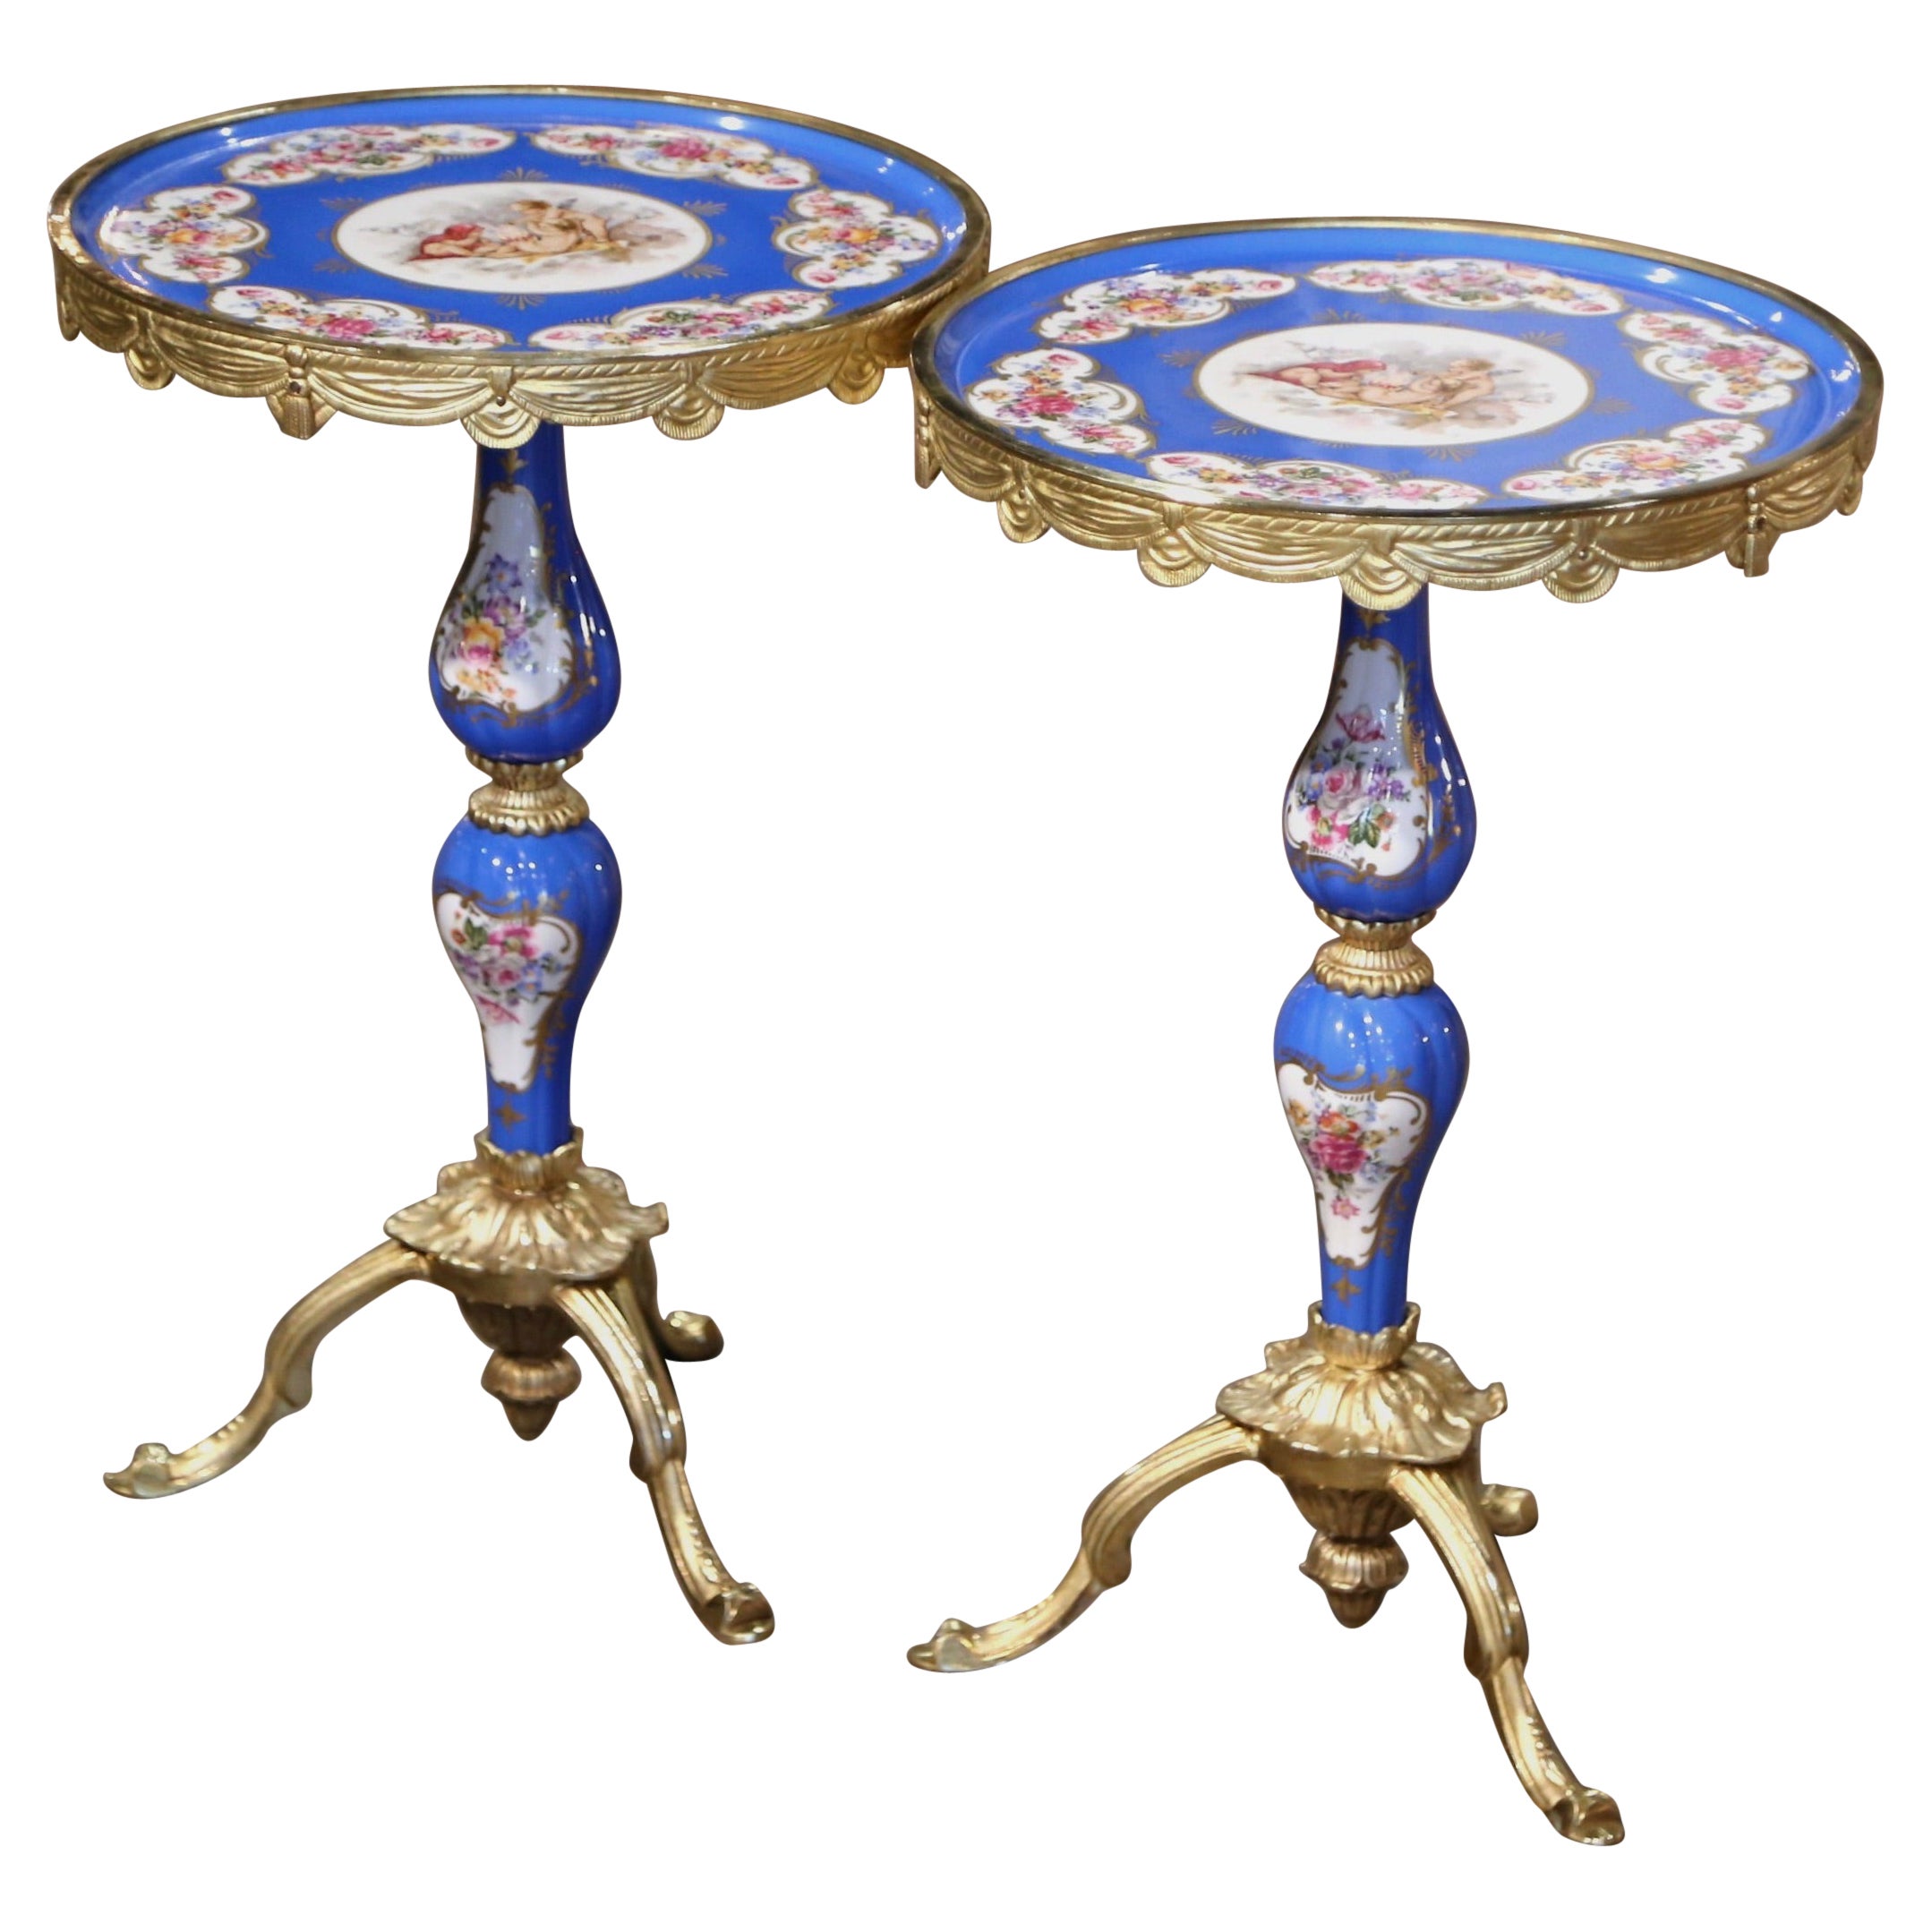 Pair of Mid-Century French Sevres Porcelain and Bronze Dore Martini Side Tables